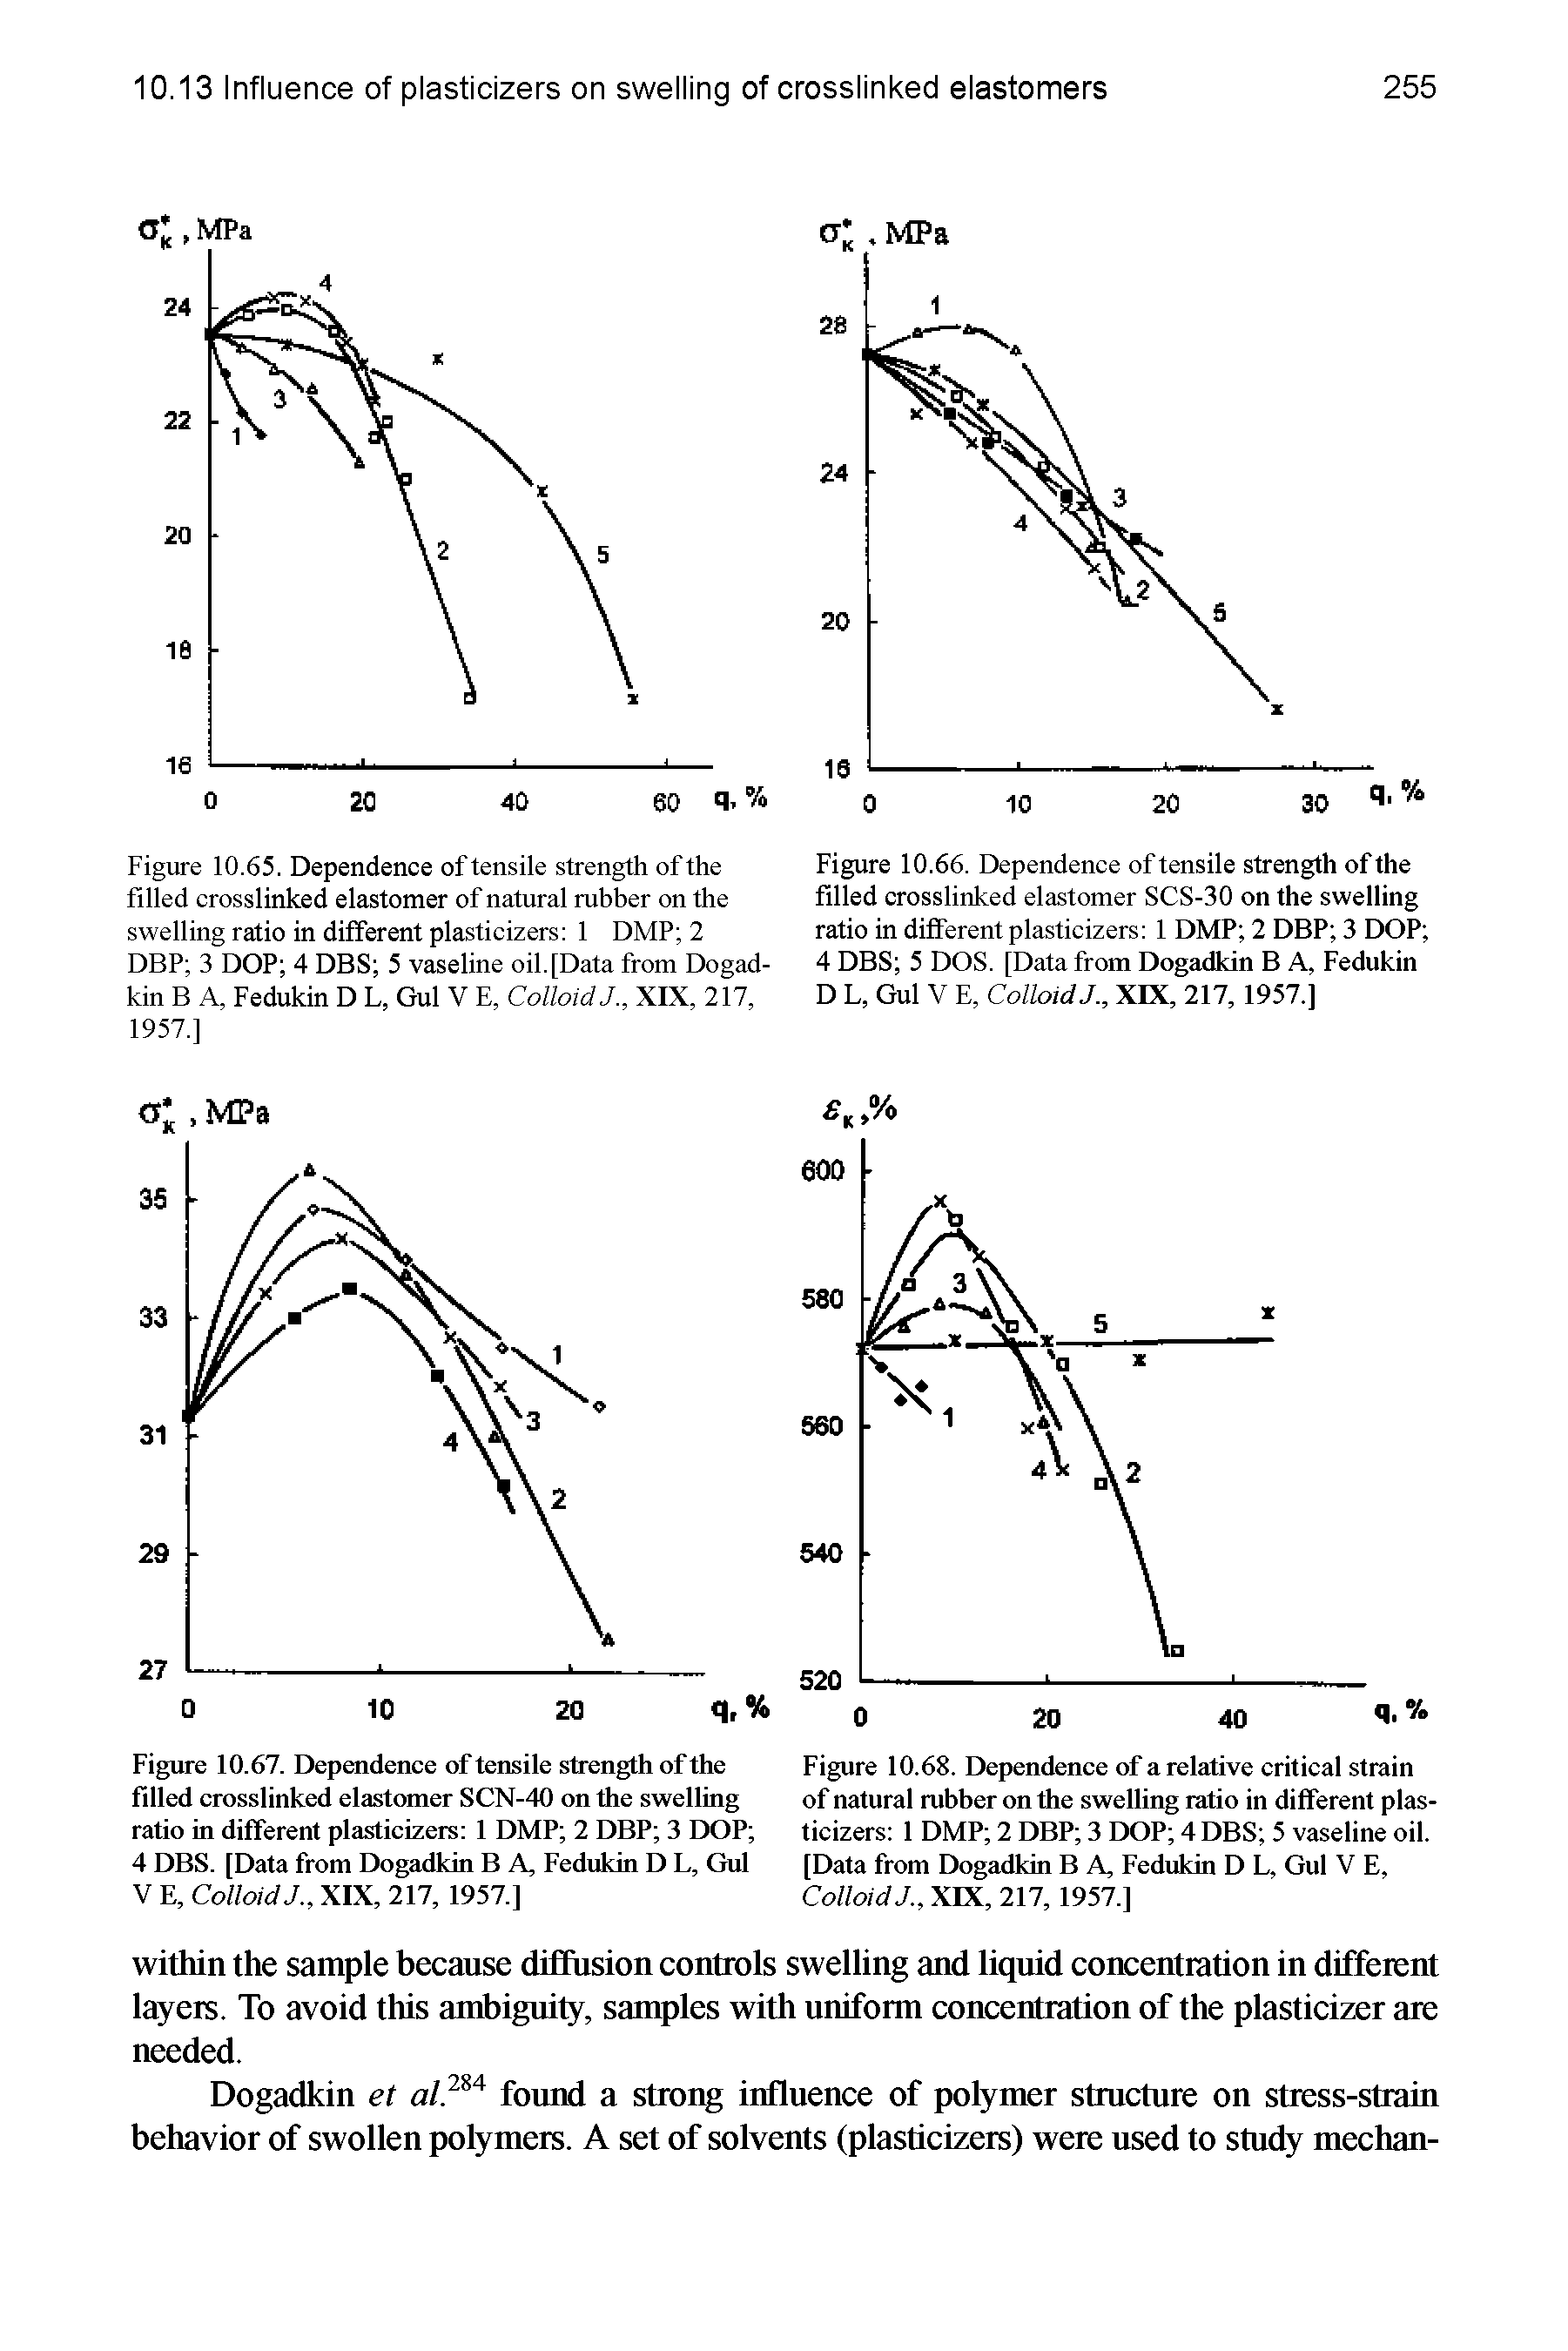 Figure 10.65. Dependence of tensile strength of the filled crosslinked elastomer of natural rubber on the swelling ratio in different plasticizers 1 DMP 2 DBF 3 DOP 4 DBS 5 vaseline oil. [Data from Dogad-kin B A, Fedukin D L, Gul V E, Colloid J., XIX, 217, 1957.1...